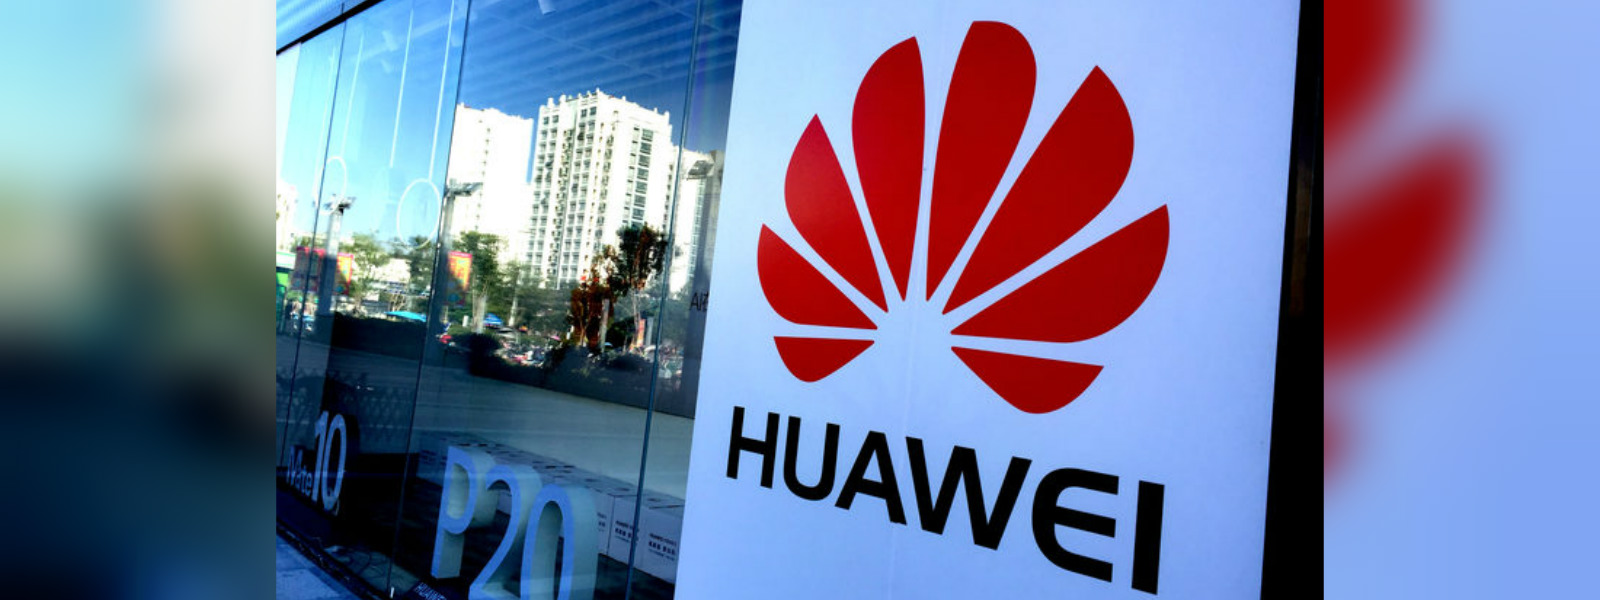 Huawei fights consumer fears at Thai smartphone expo as sales drop